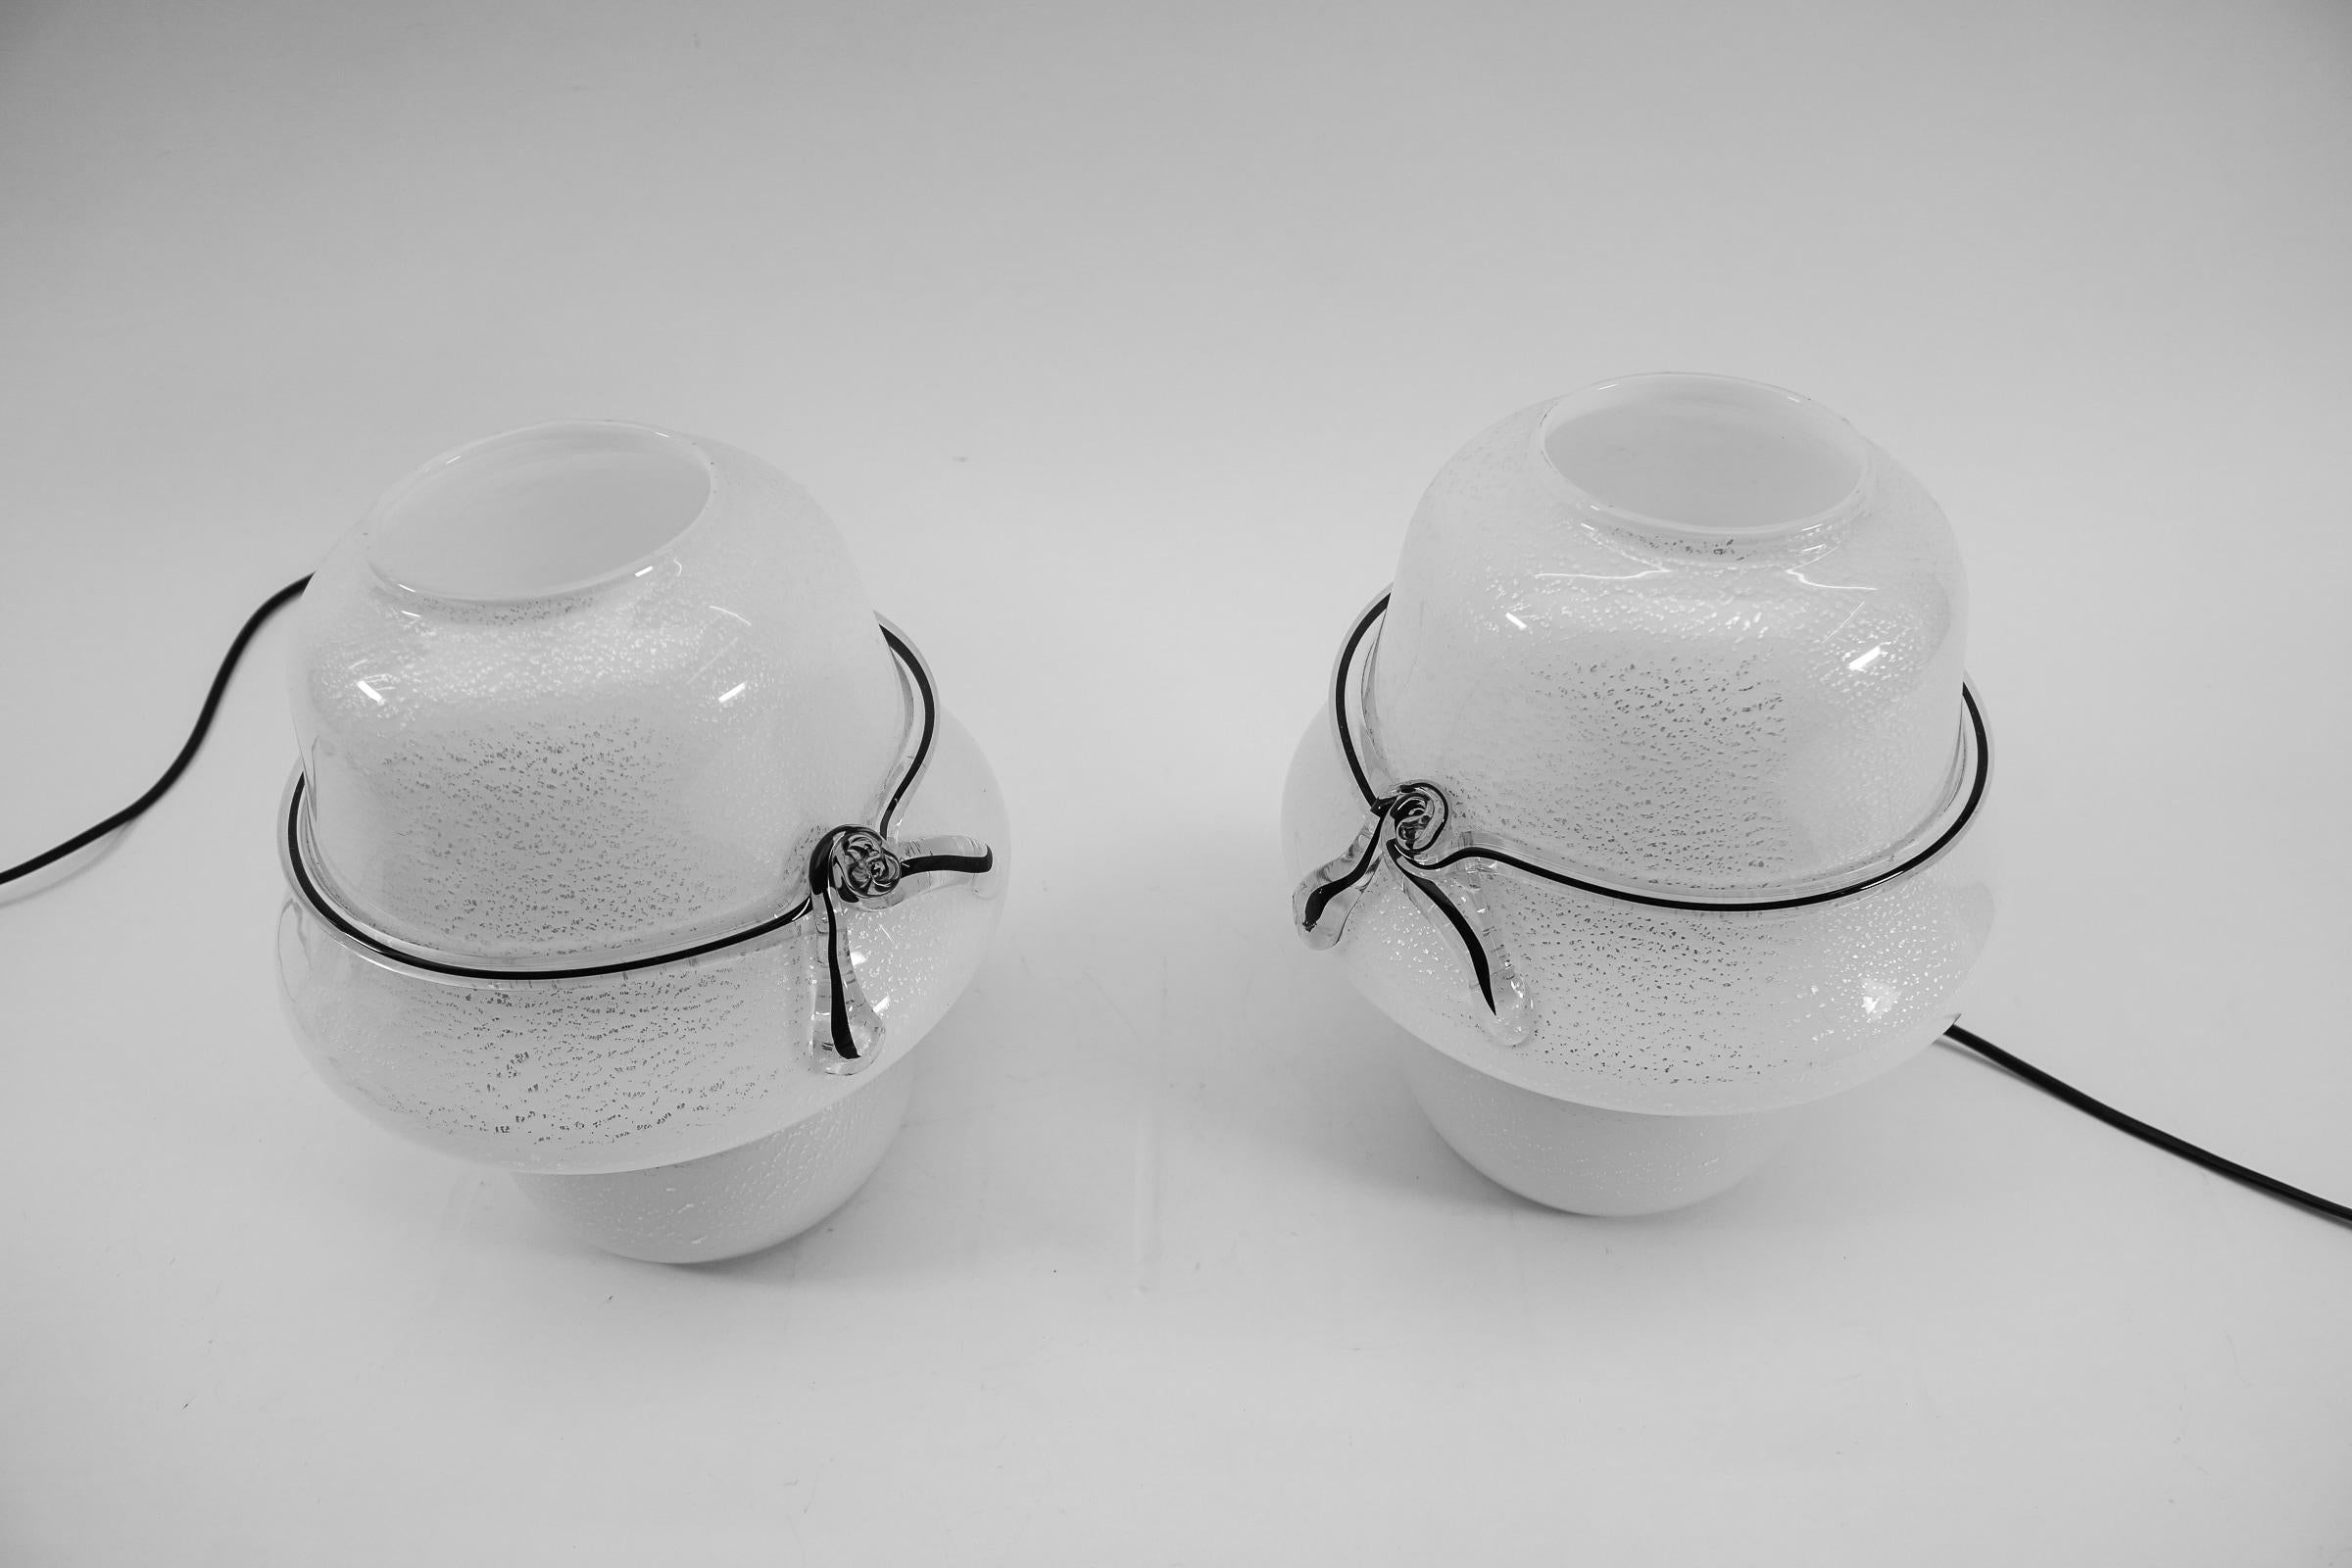 Pair of Murano Mushroom Table Lamps with Enclosed Silver Platelets, 1960s For Sale 2